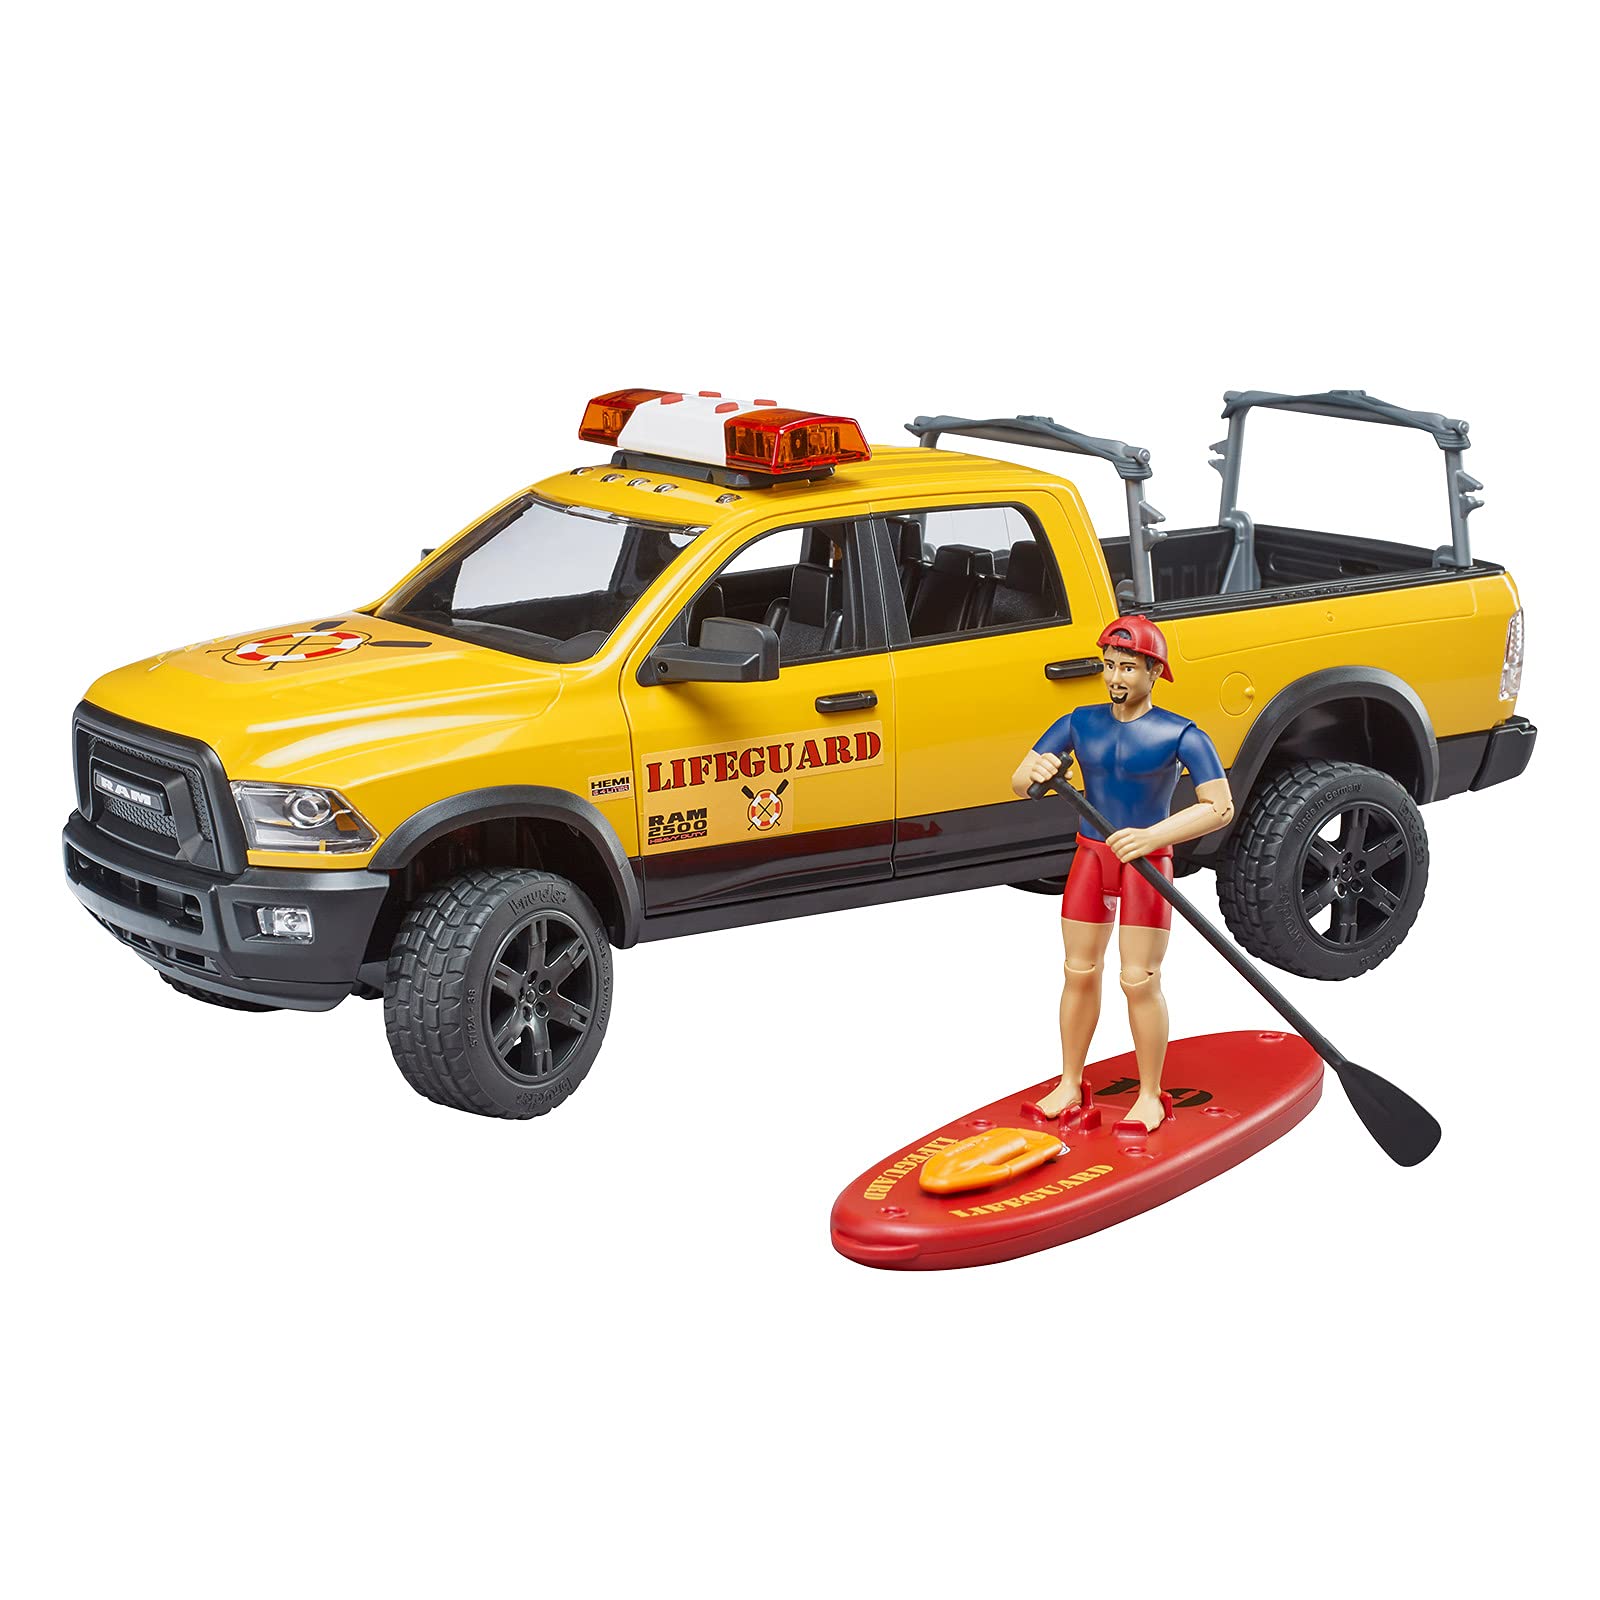 RAM 2500 Power Wagon guardaspiaggia con Stand Up Paddle